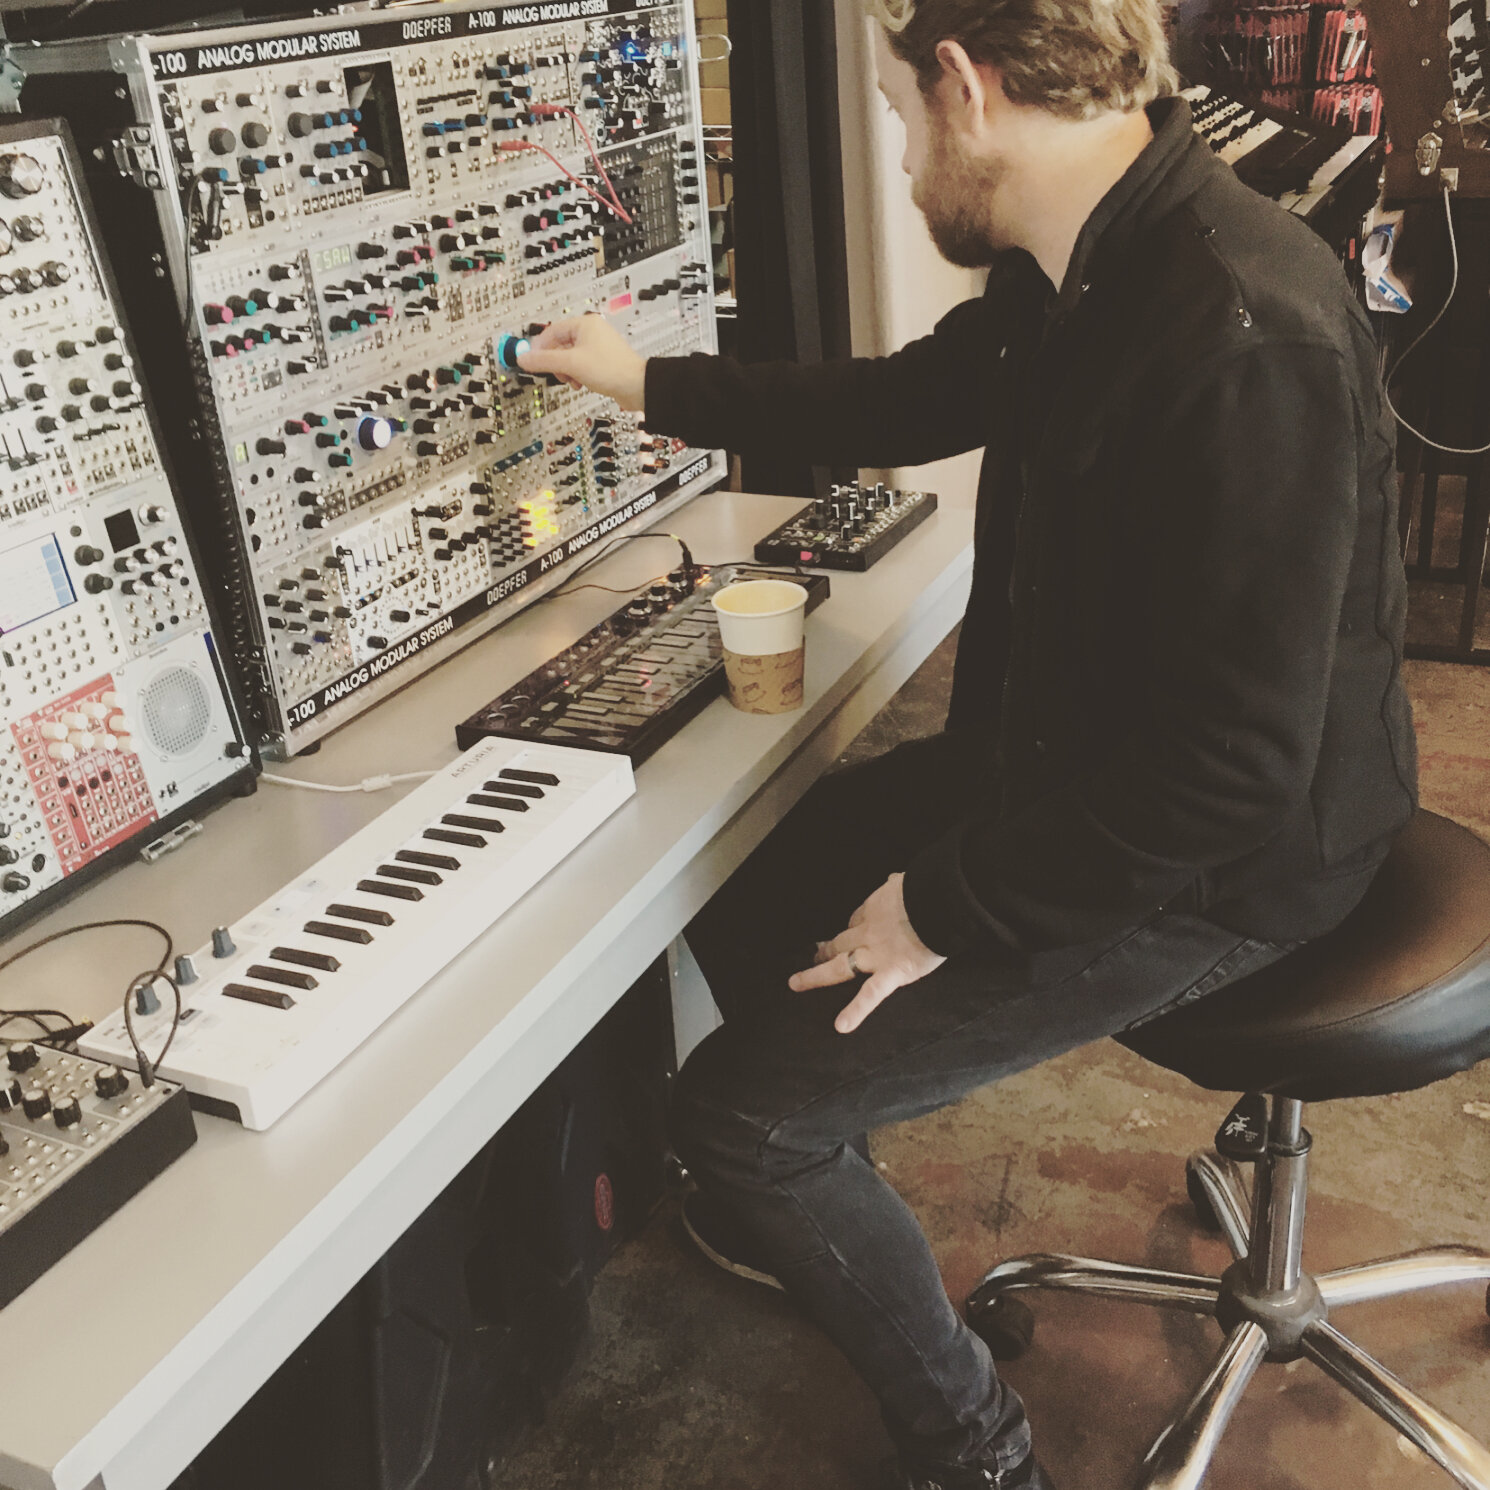 No patch cables, no problem!  What a great synth shop 👍🤖 #switchedonaustin